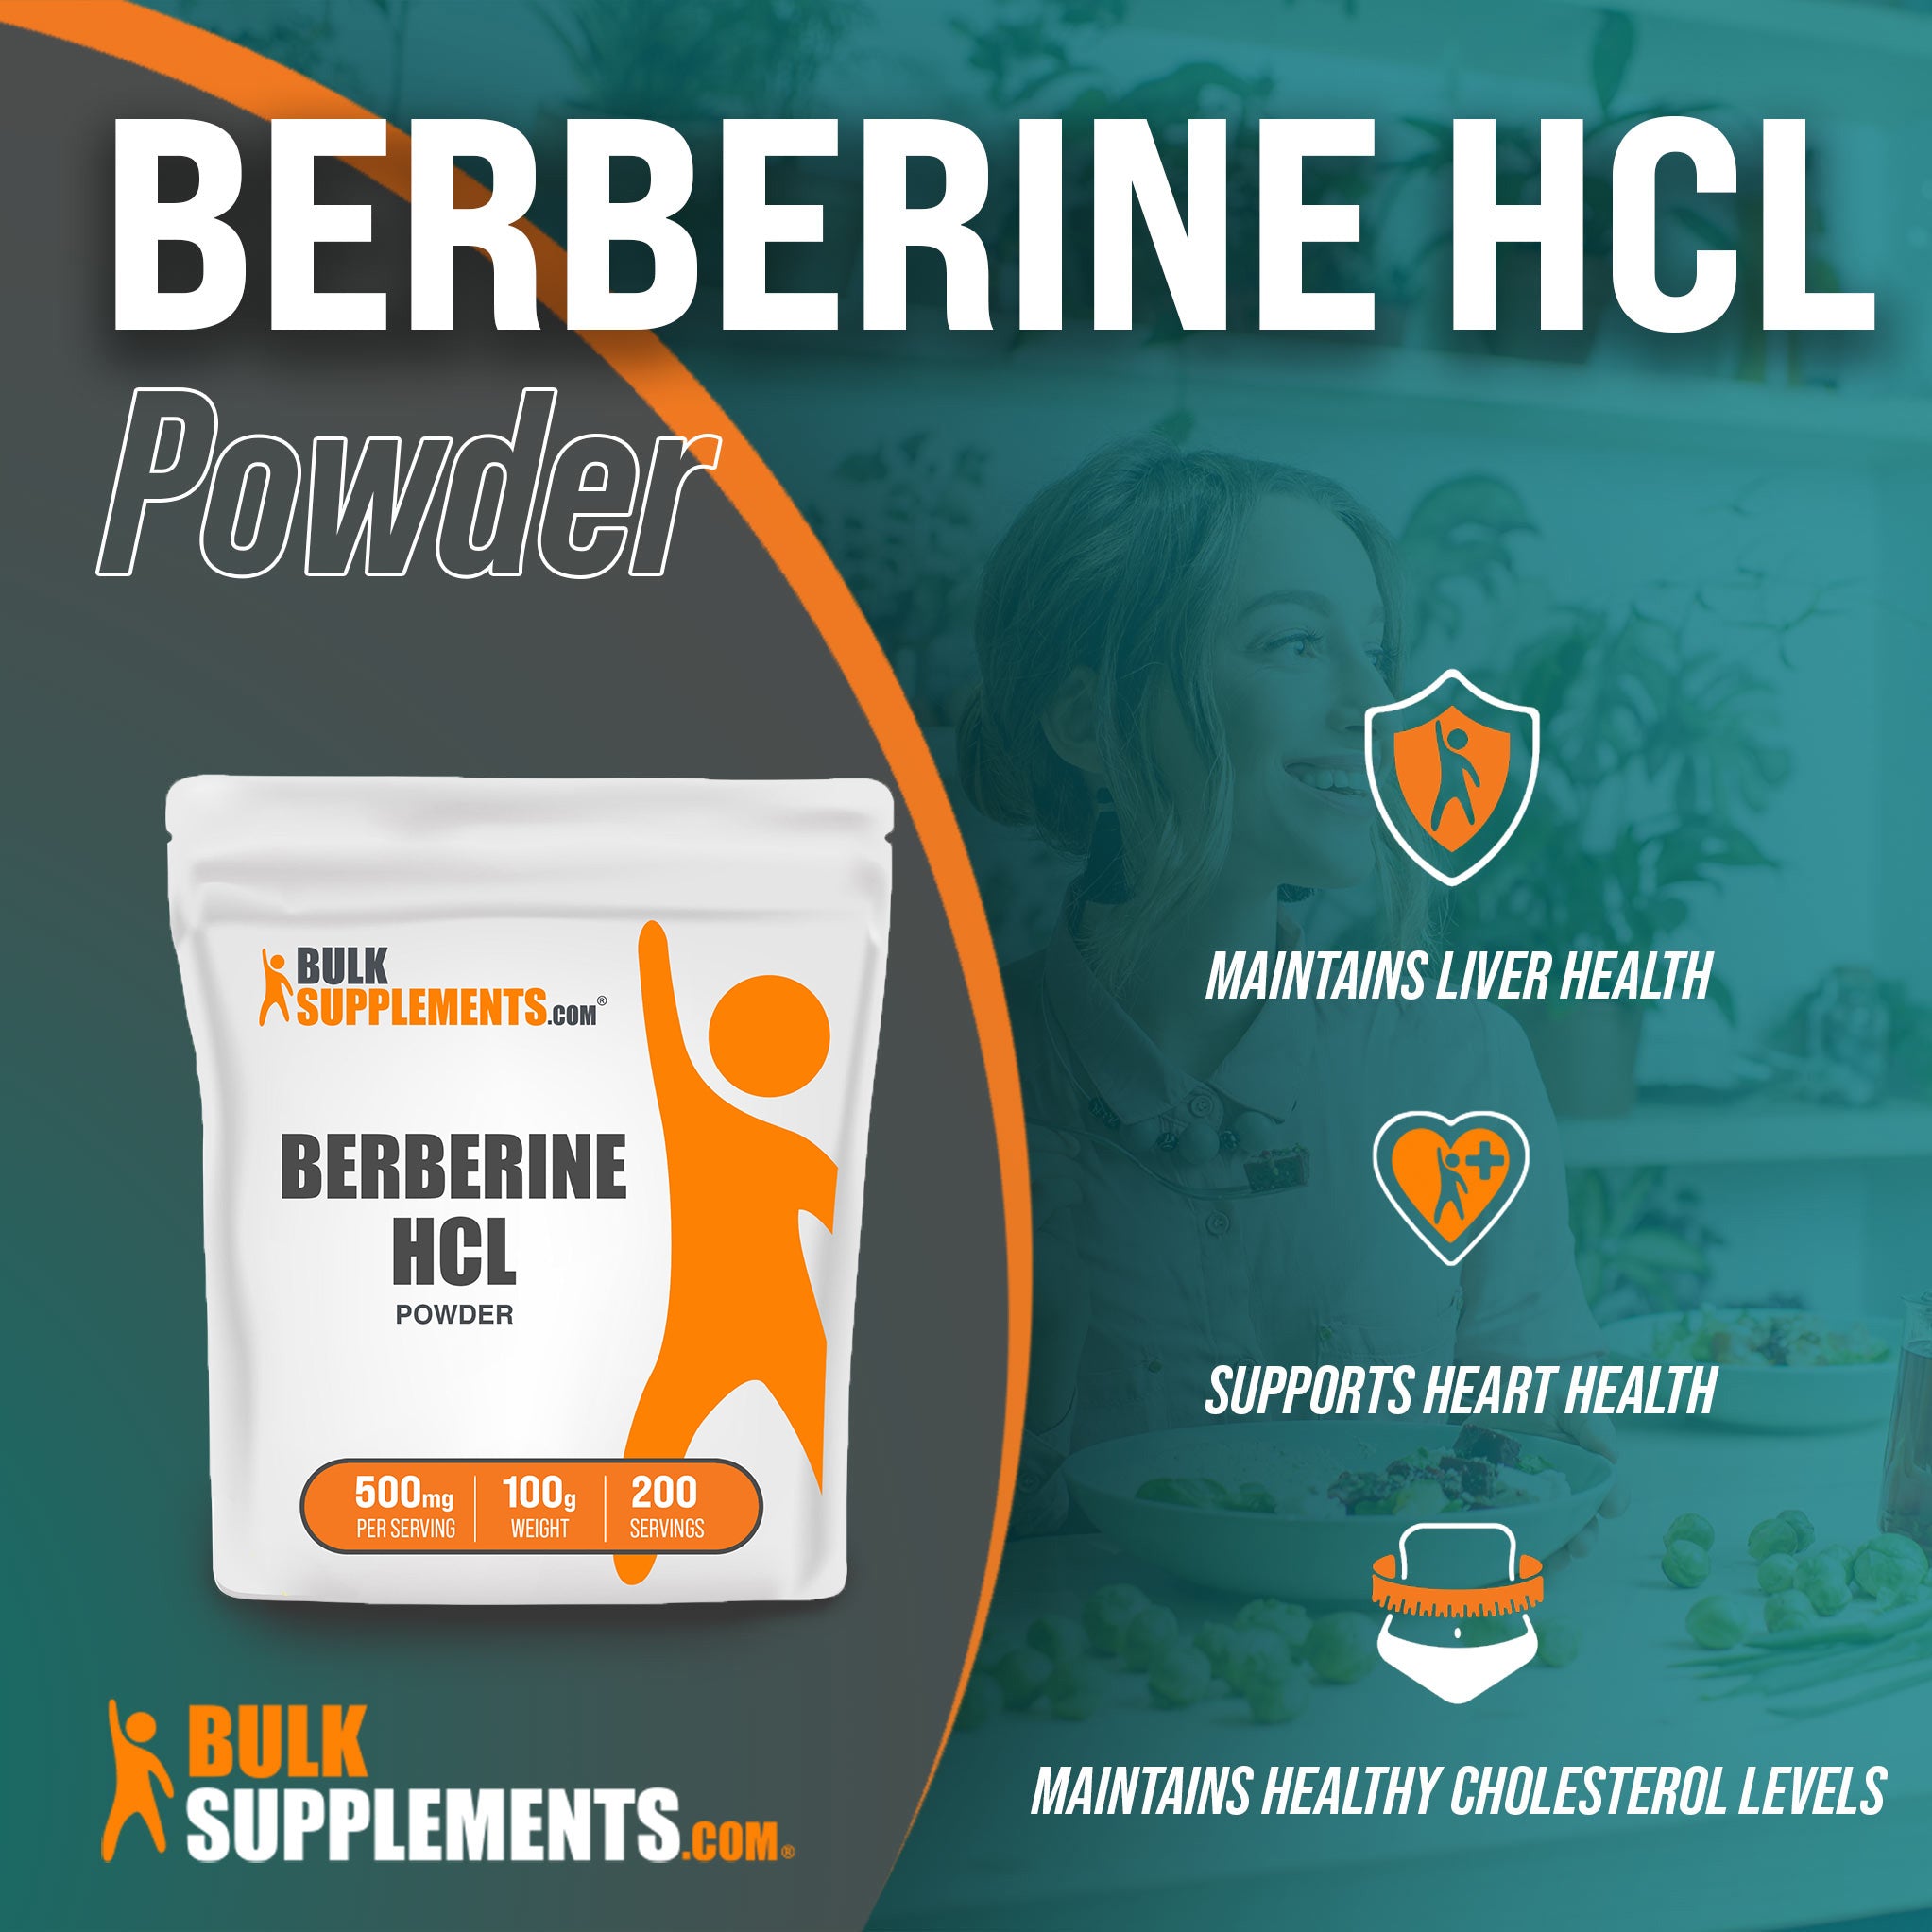 Berberine HCL from Bulk Supplements for healthy heart and cholesterol levels